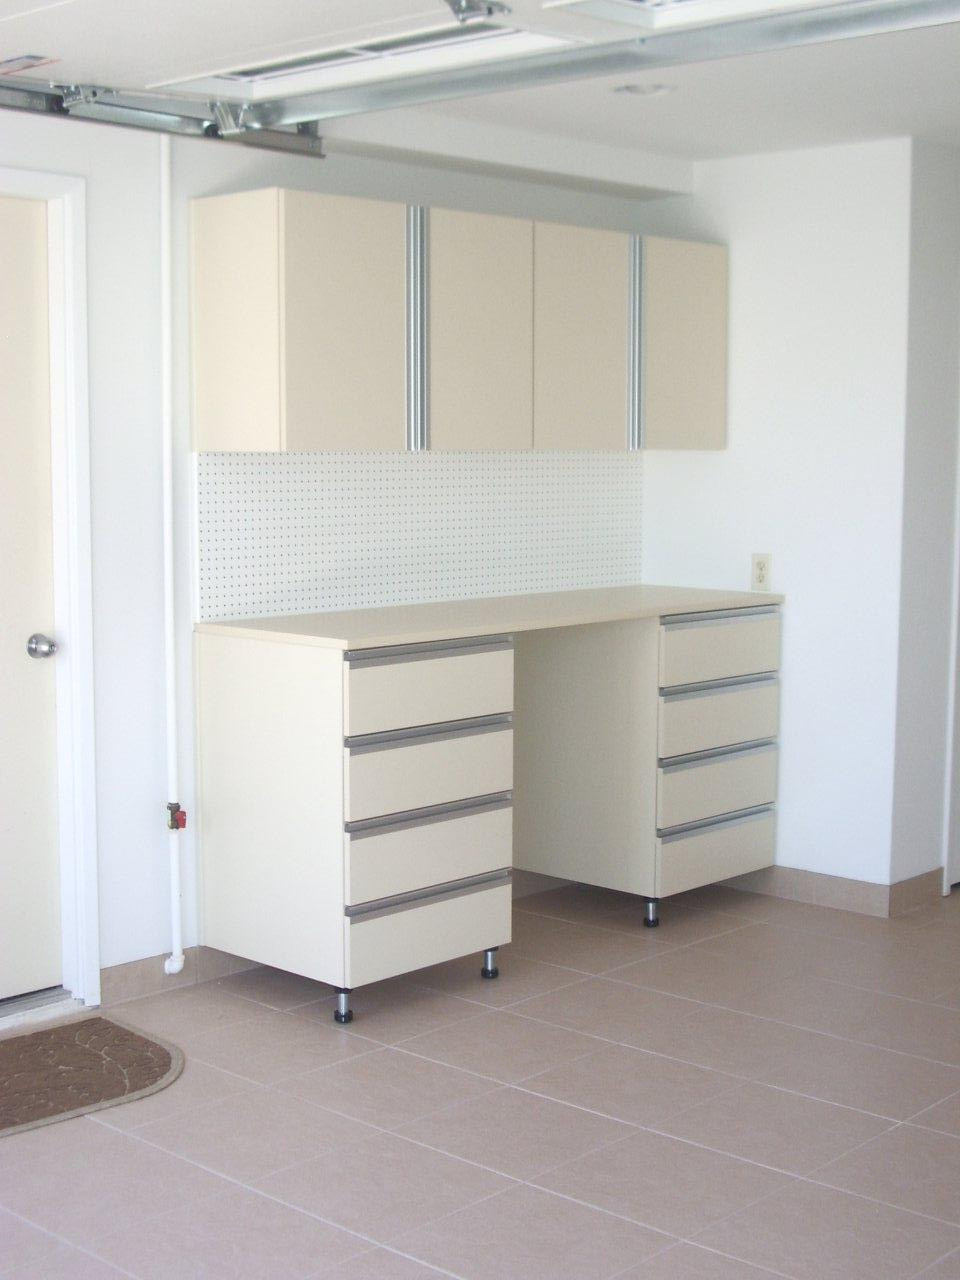 Lowes Garage Organization
 Home Tips Create A Customized Storage Space With Lowes